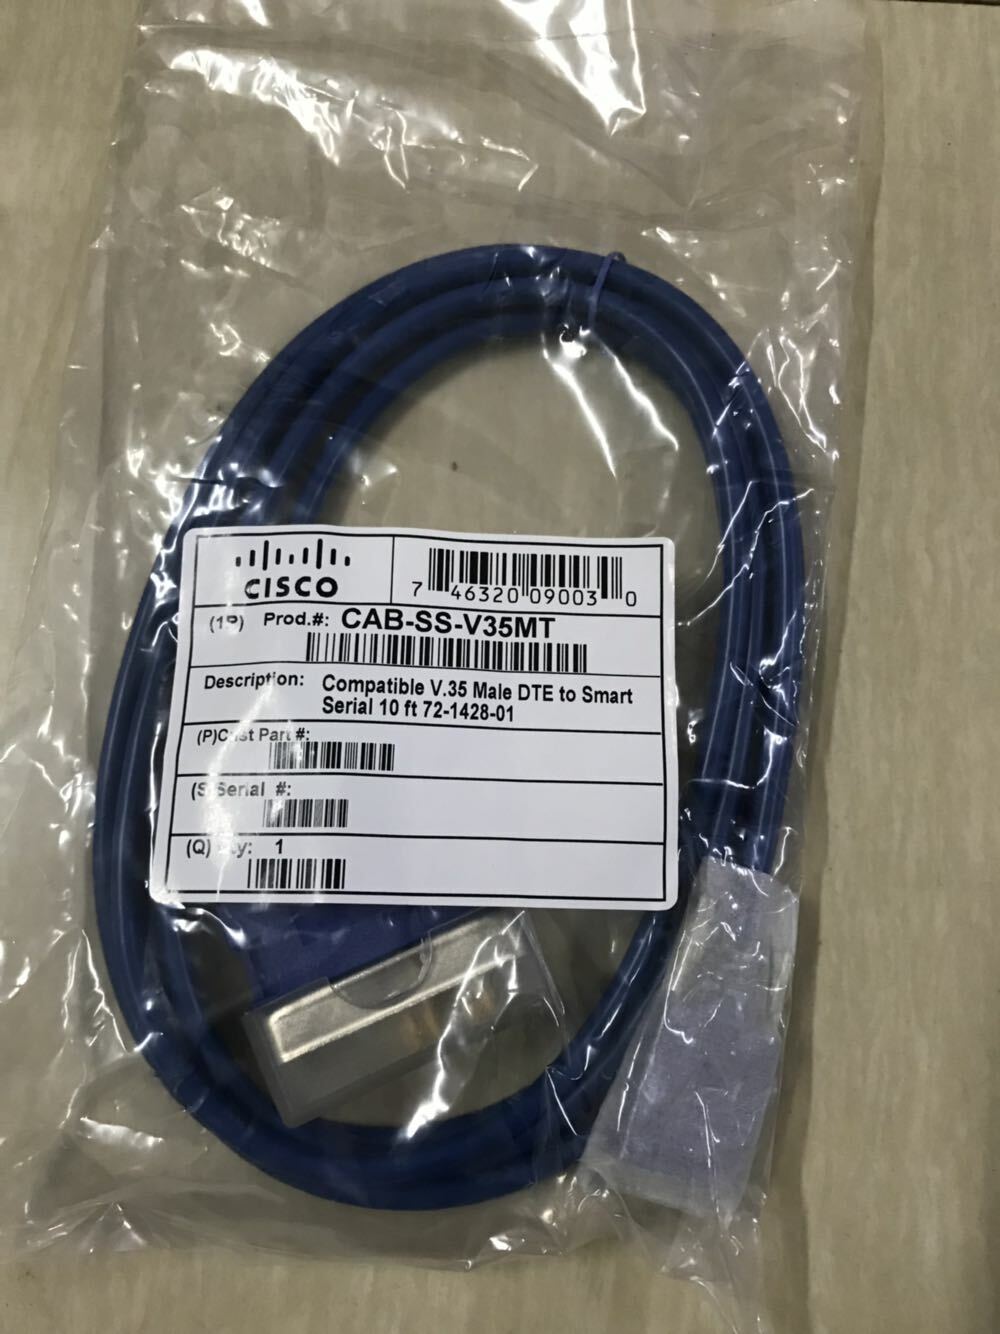 1PC Cisco CAB-SS-V35MT V.35 Networking Cable DTE Male to Smart Serial 10 Feet 3M